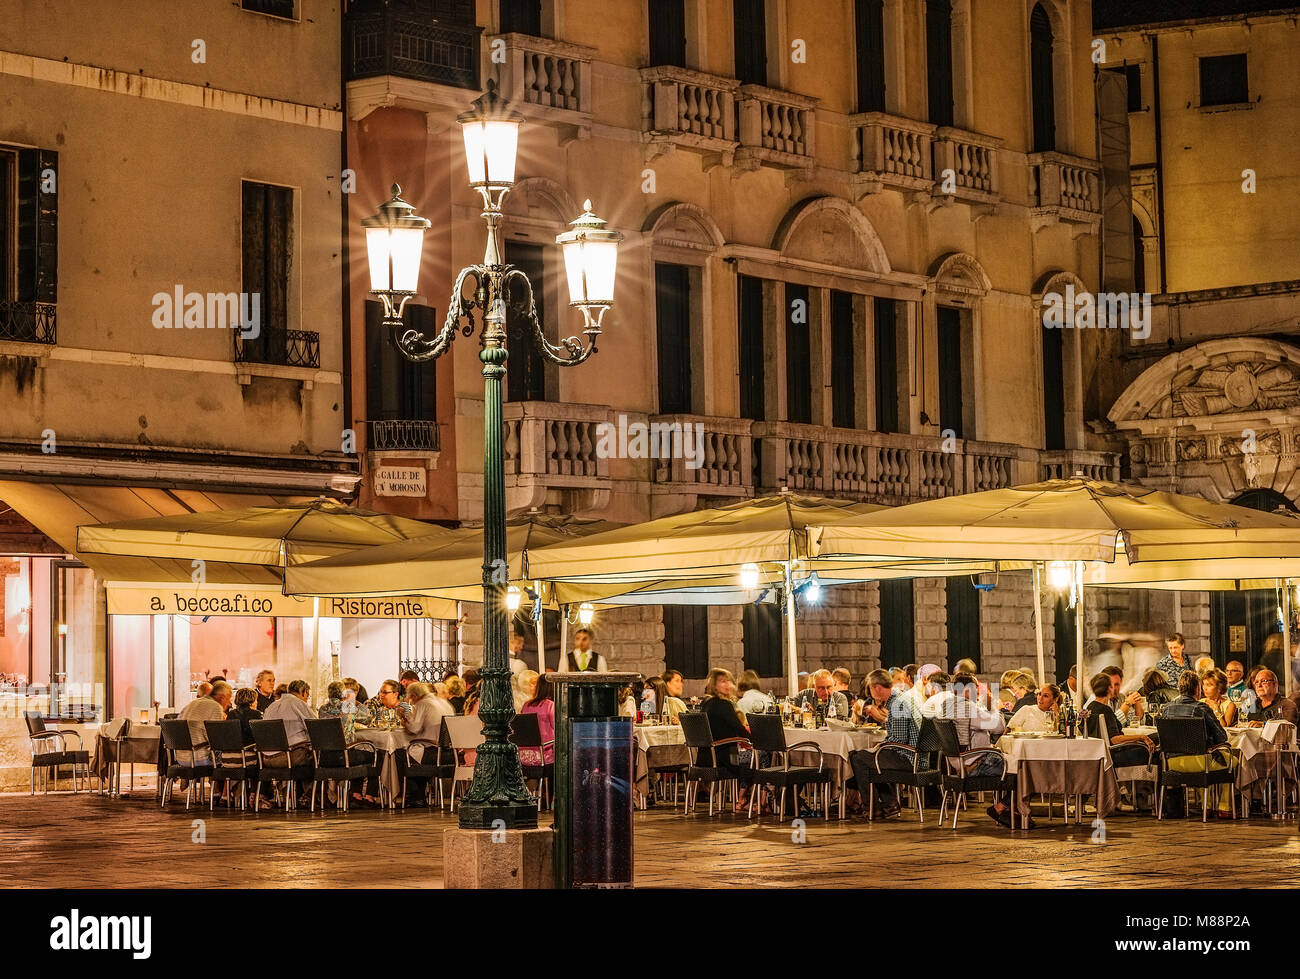 Patrons at an outdoor cafe restaurant, Venice, Italy Stock Photo